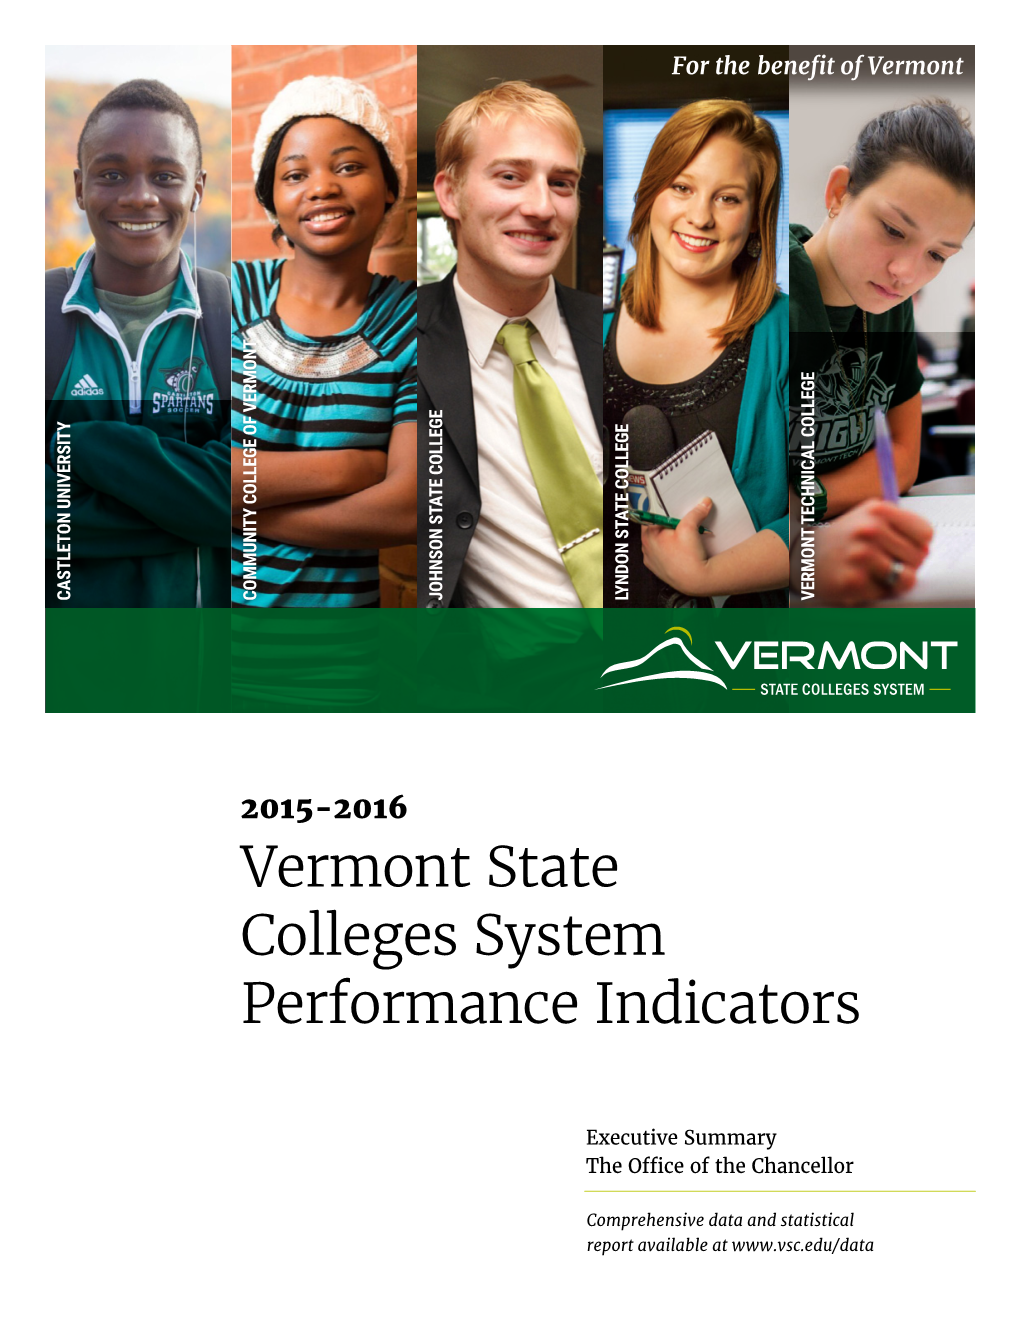 Vermont State Colleges System Performance Indicators